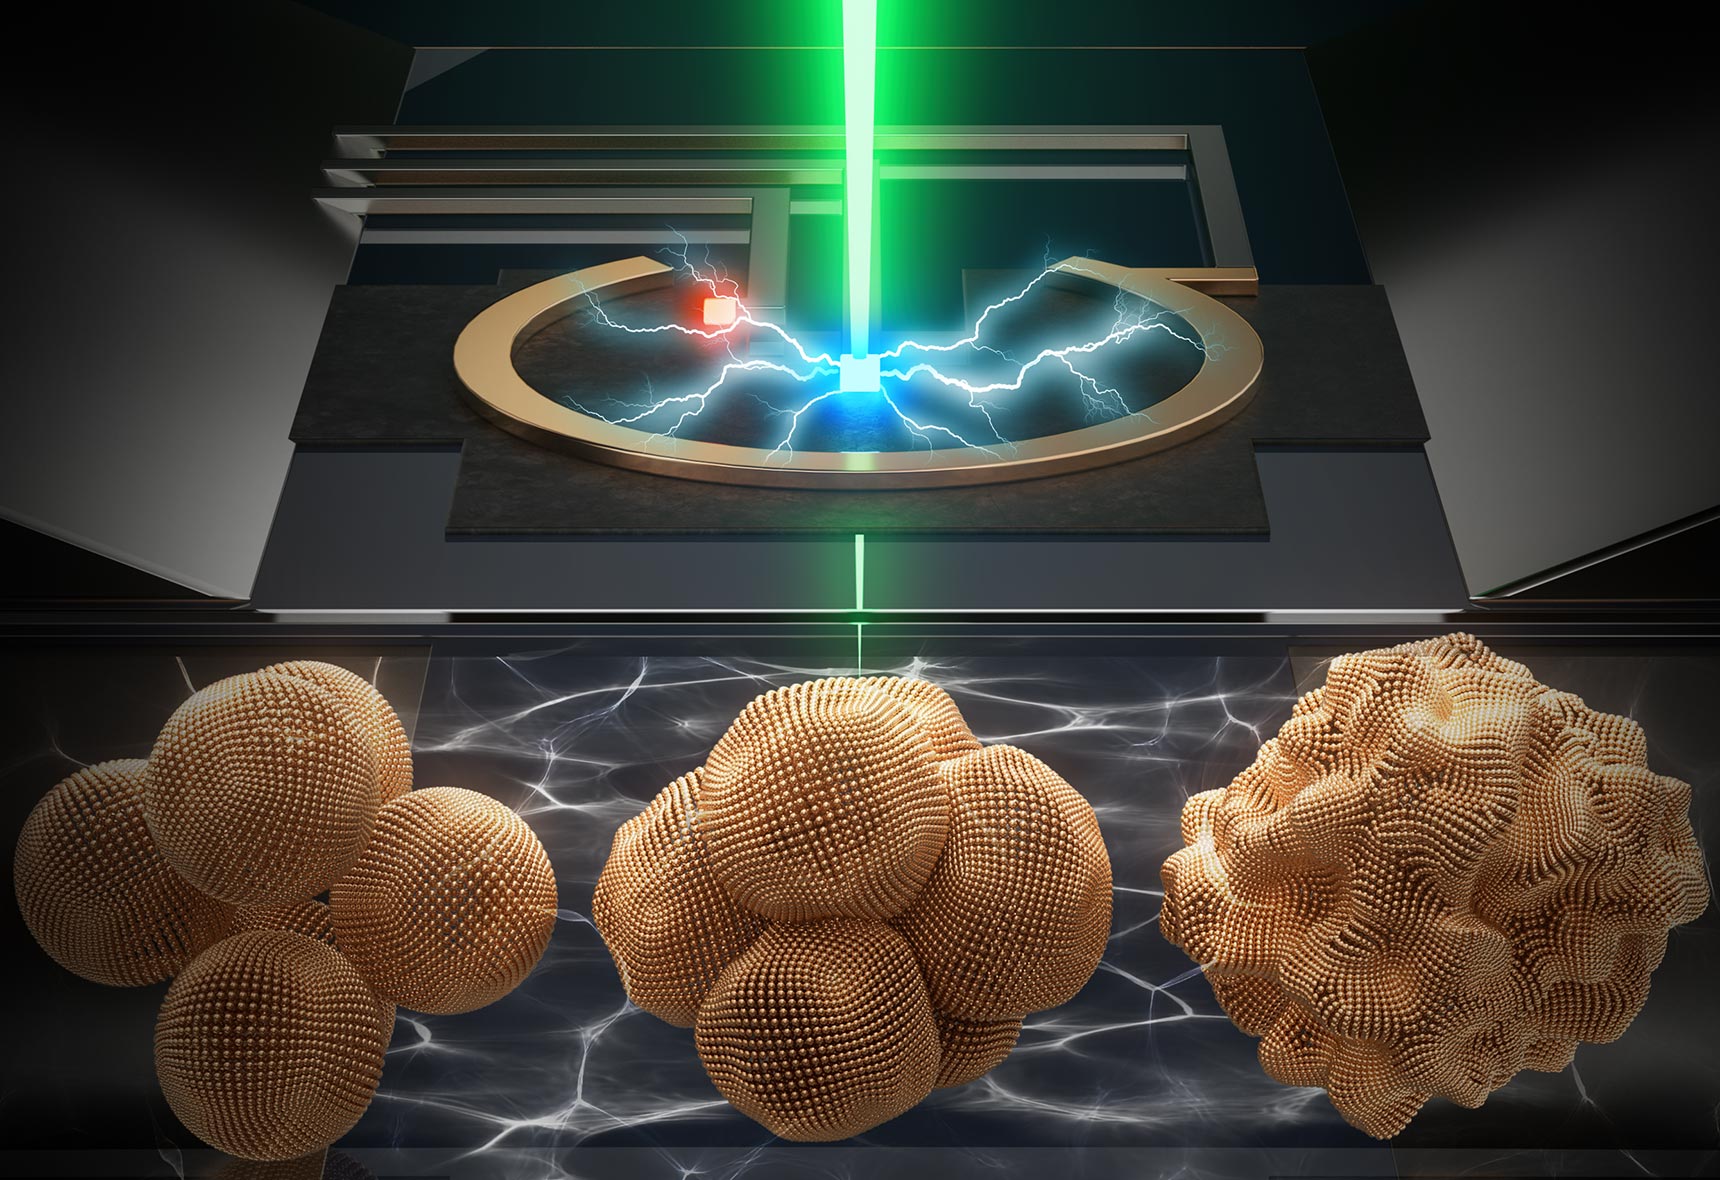 Artist’s rendering of a copper nanoparticle as it evolves during CO2 electrolysis: Copper nanoparticles (left) combine into larger metallic copper “nanograins” (right)